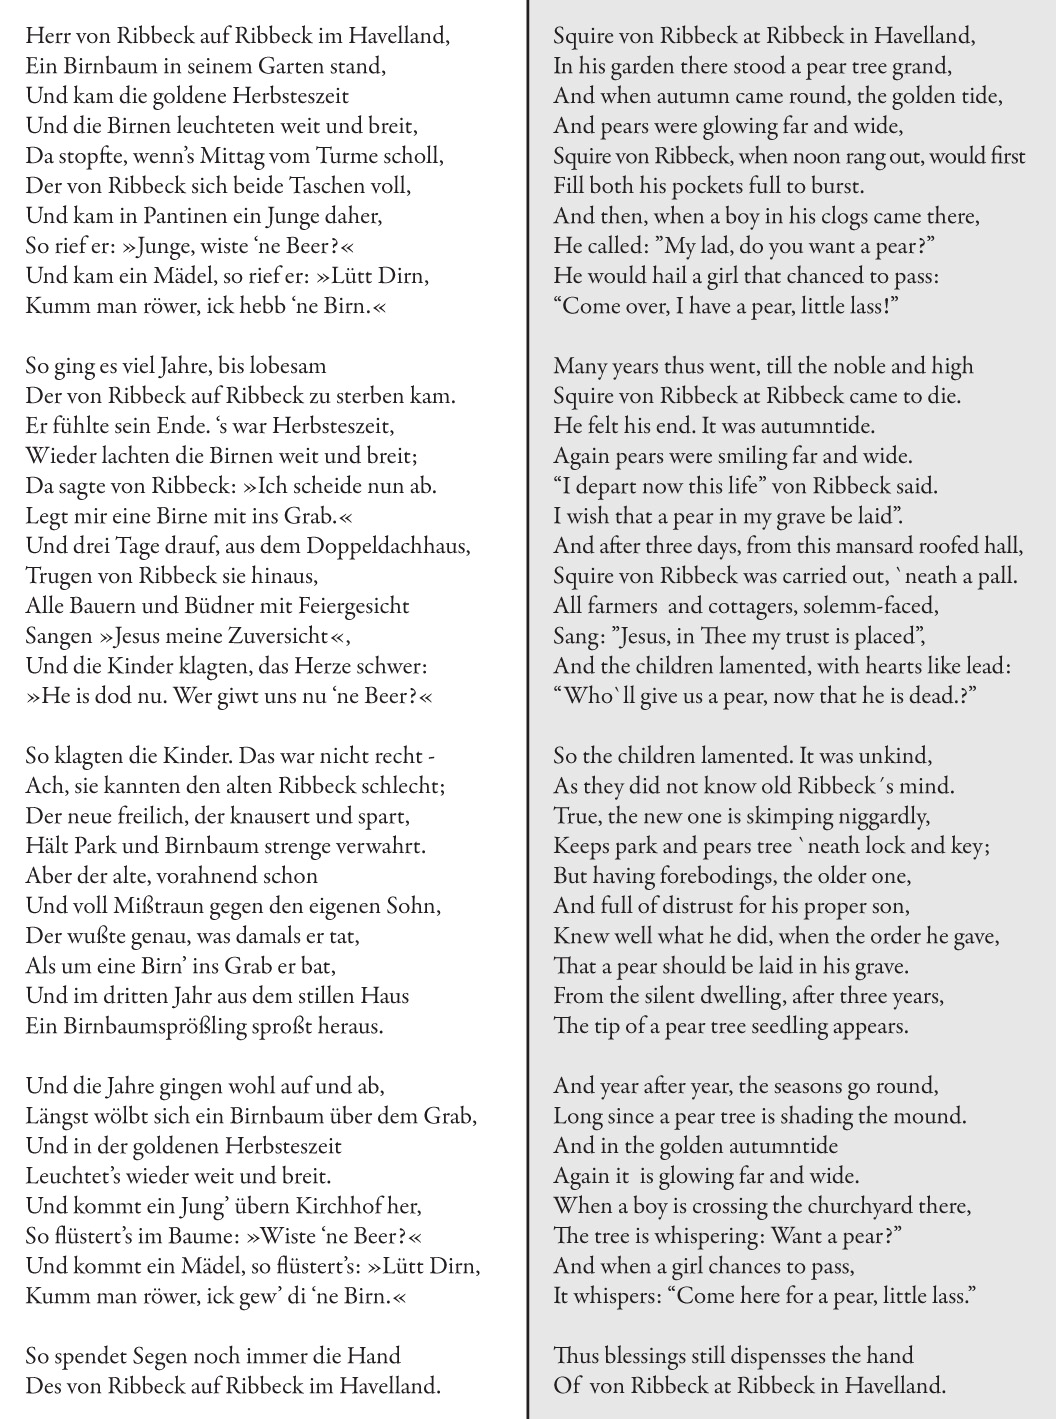 The source for this poem in German is here and its translation is available on this webpage that also includes a Hindi and an Afrikaans translation